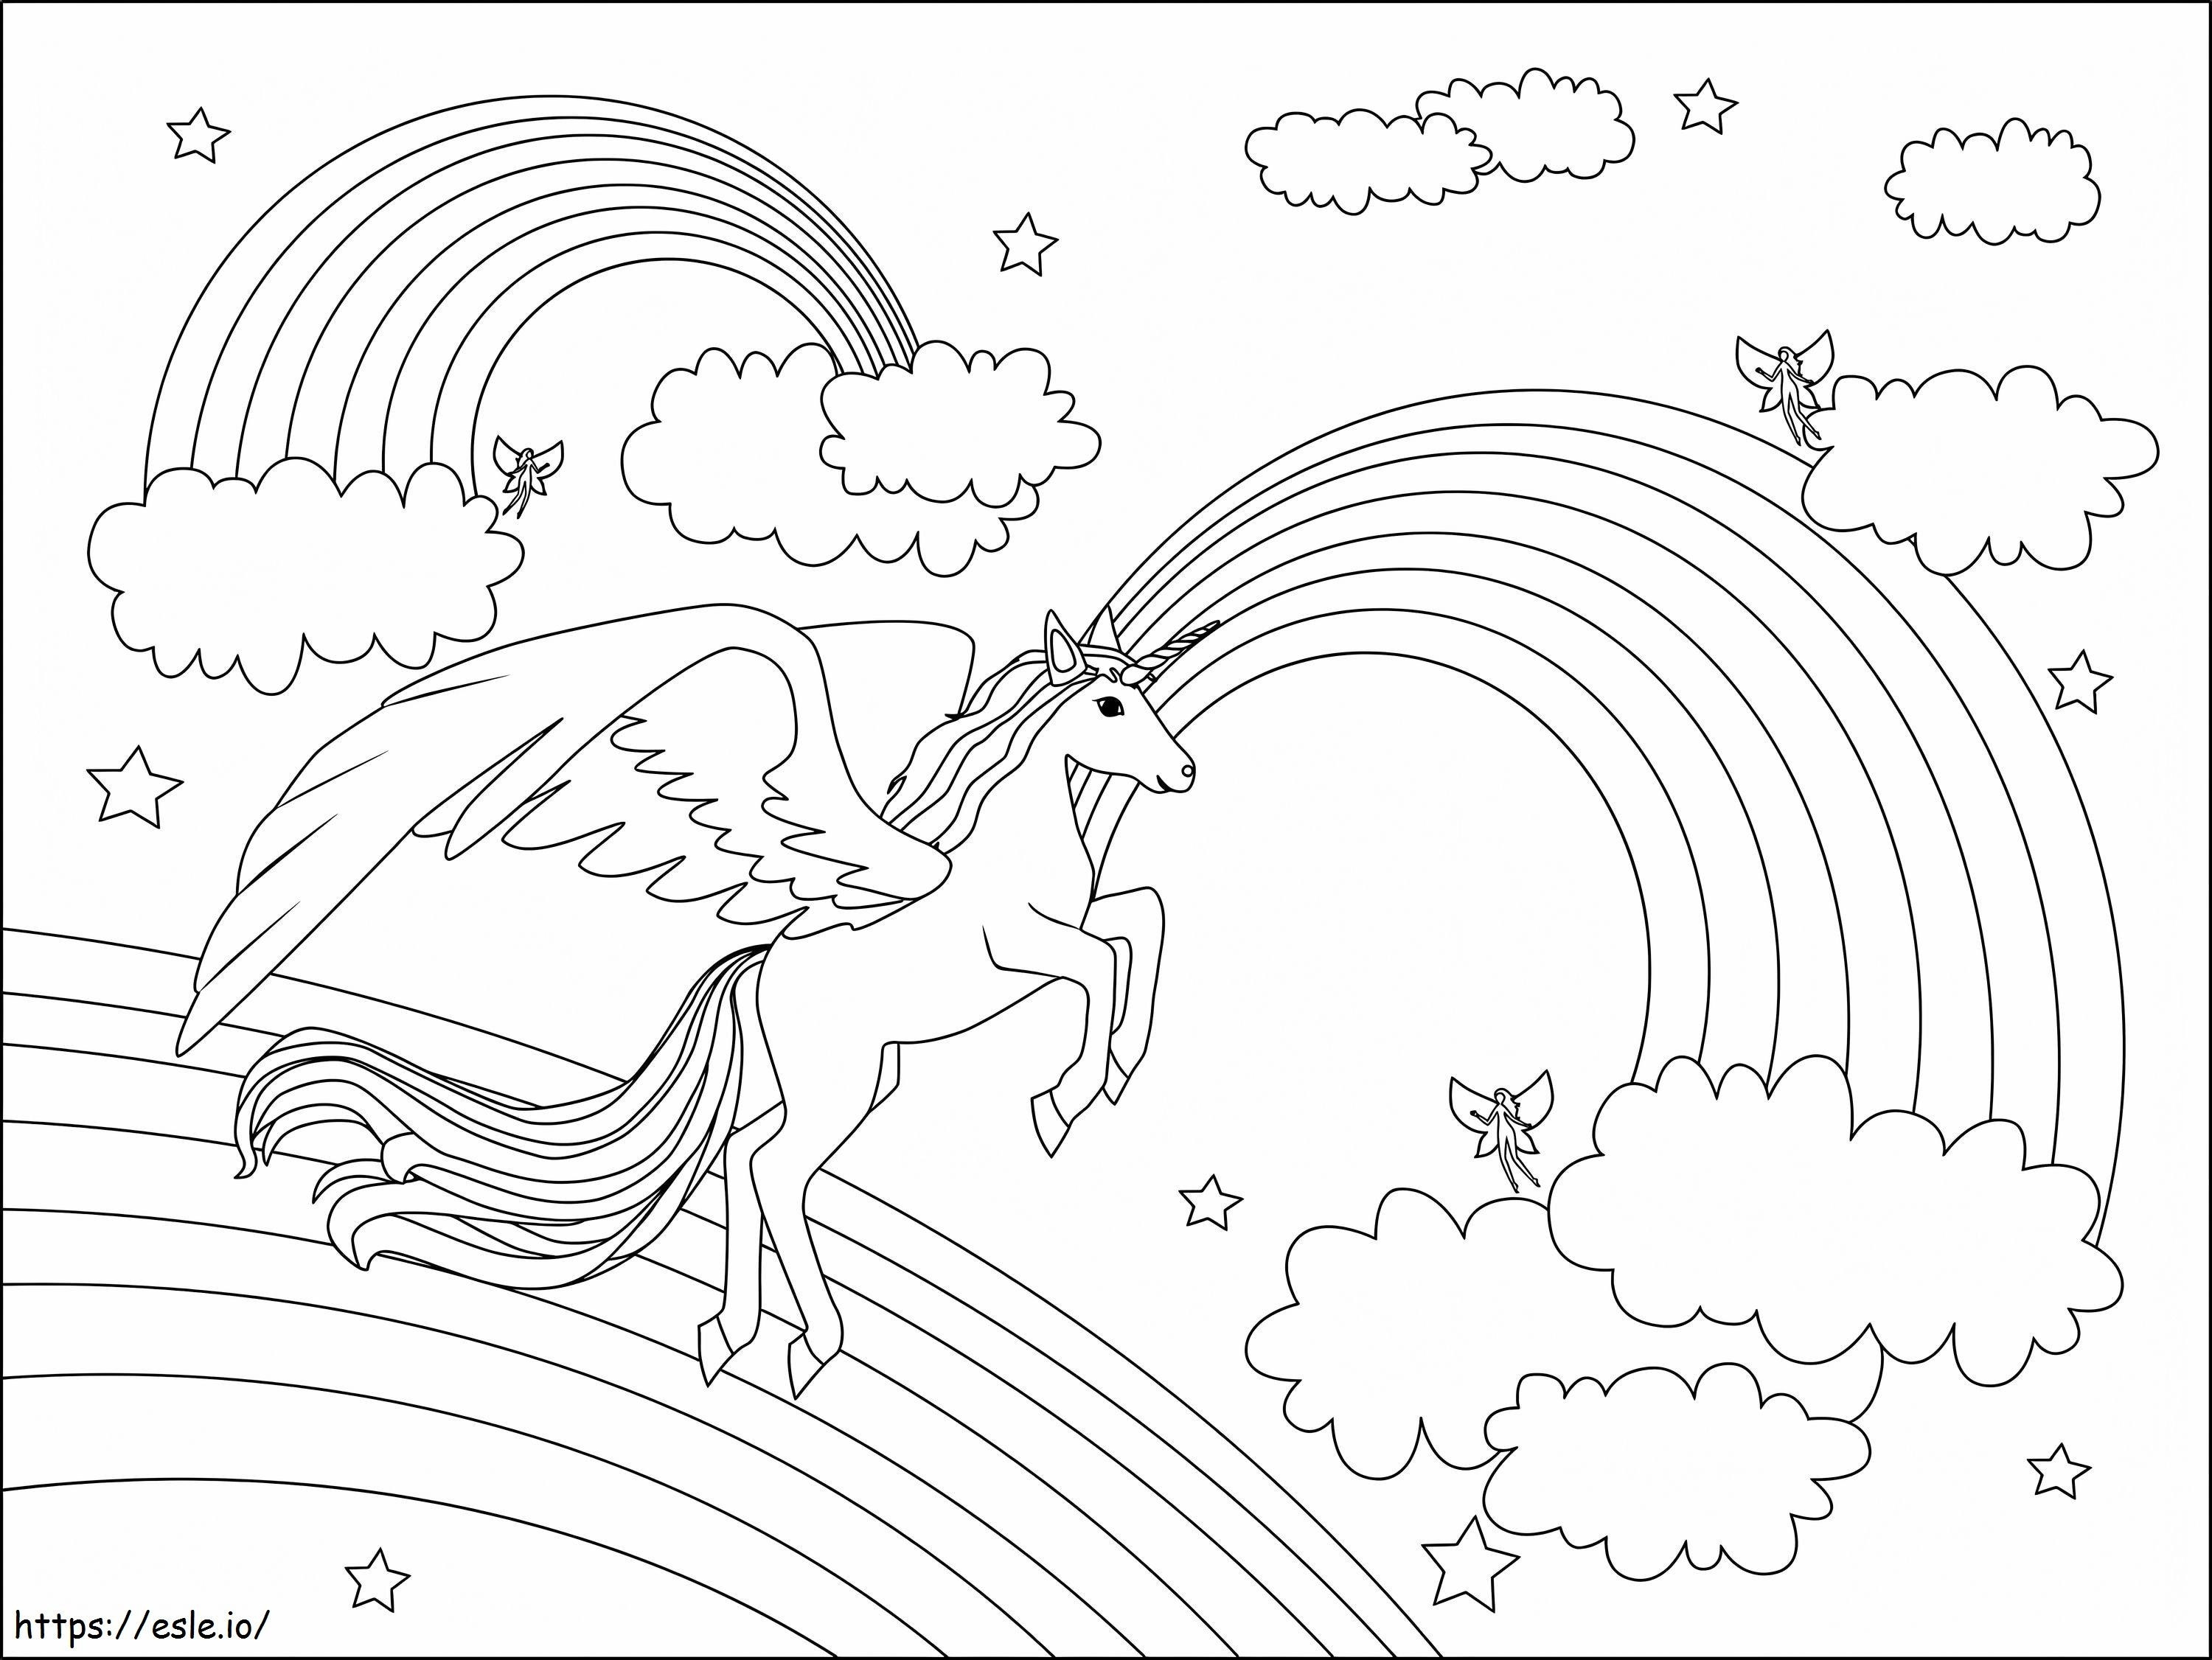 Unicorn With Three Rainbows And Clouds coloring page